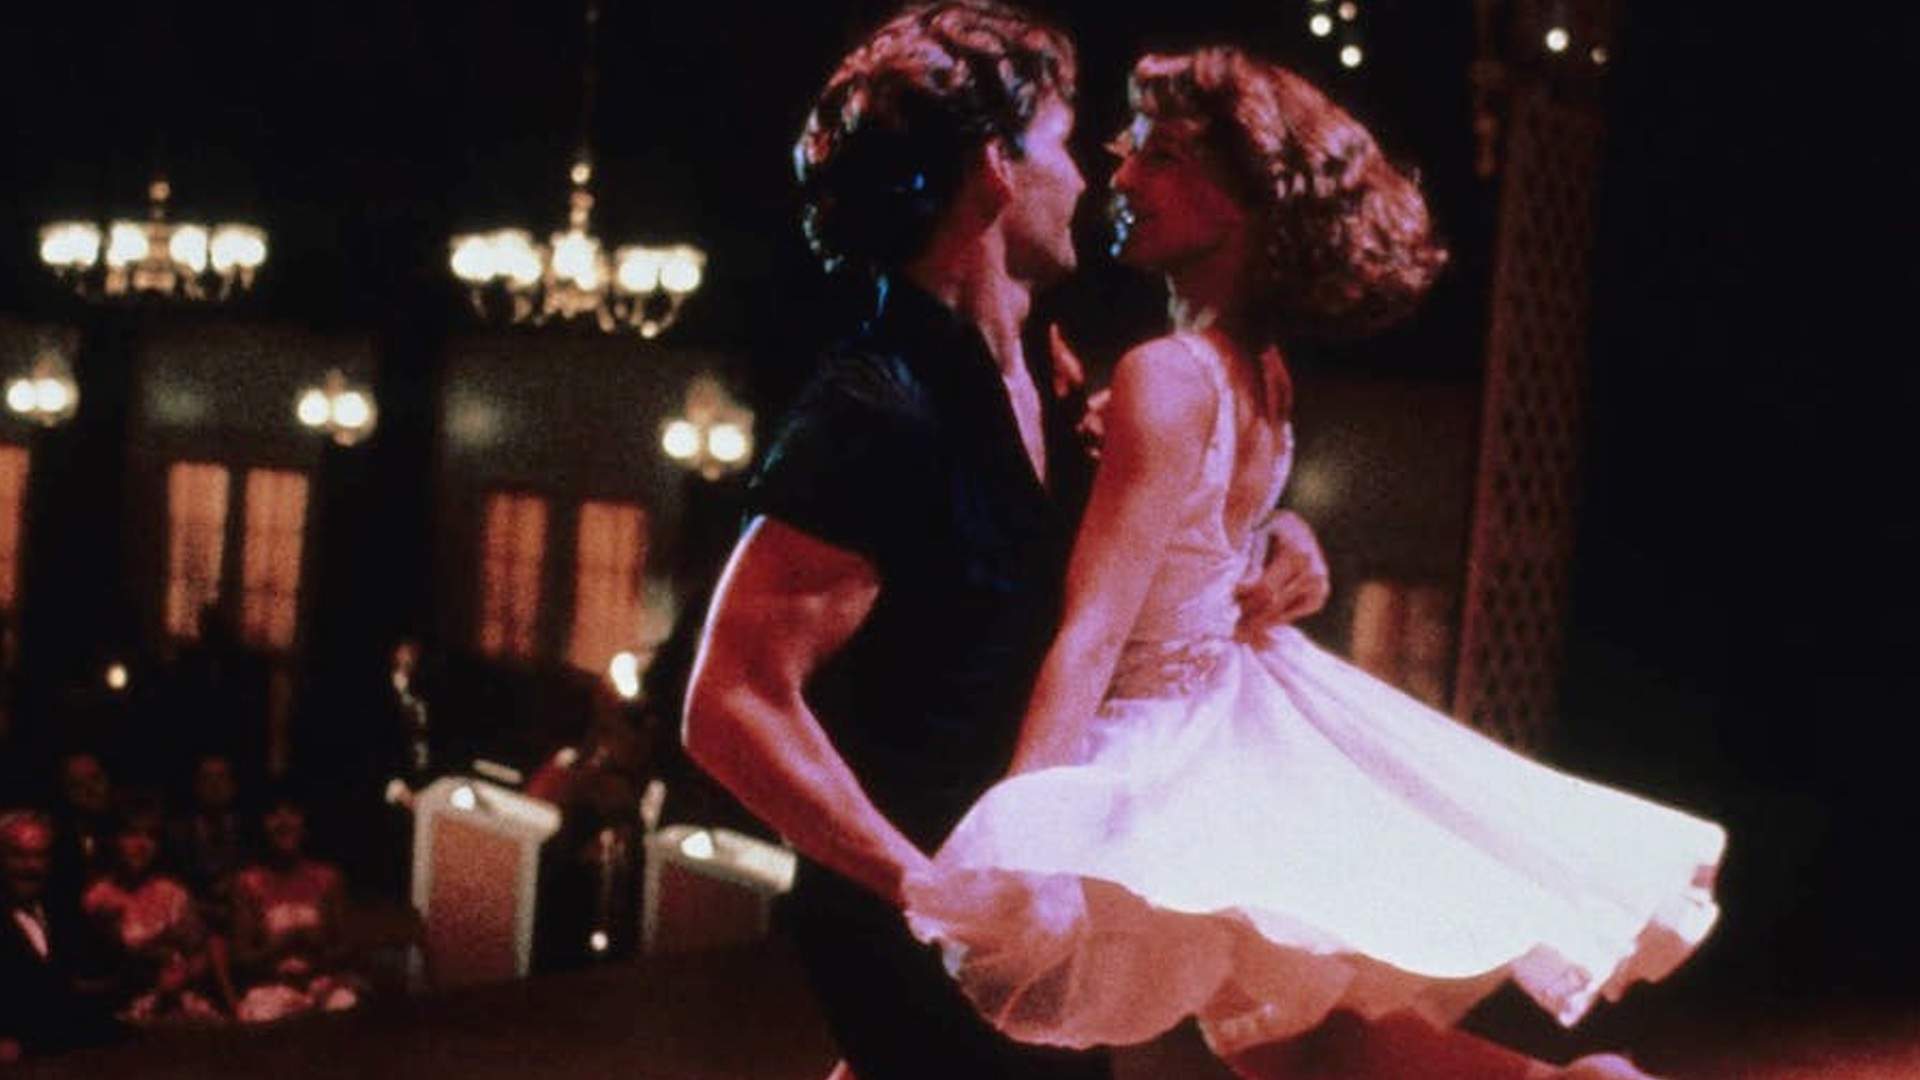 This Immersive 'Dirty Dancing' Experience Will Give You the Time of Your Life